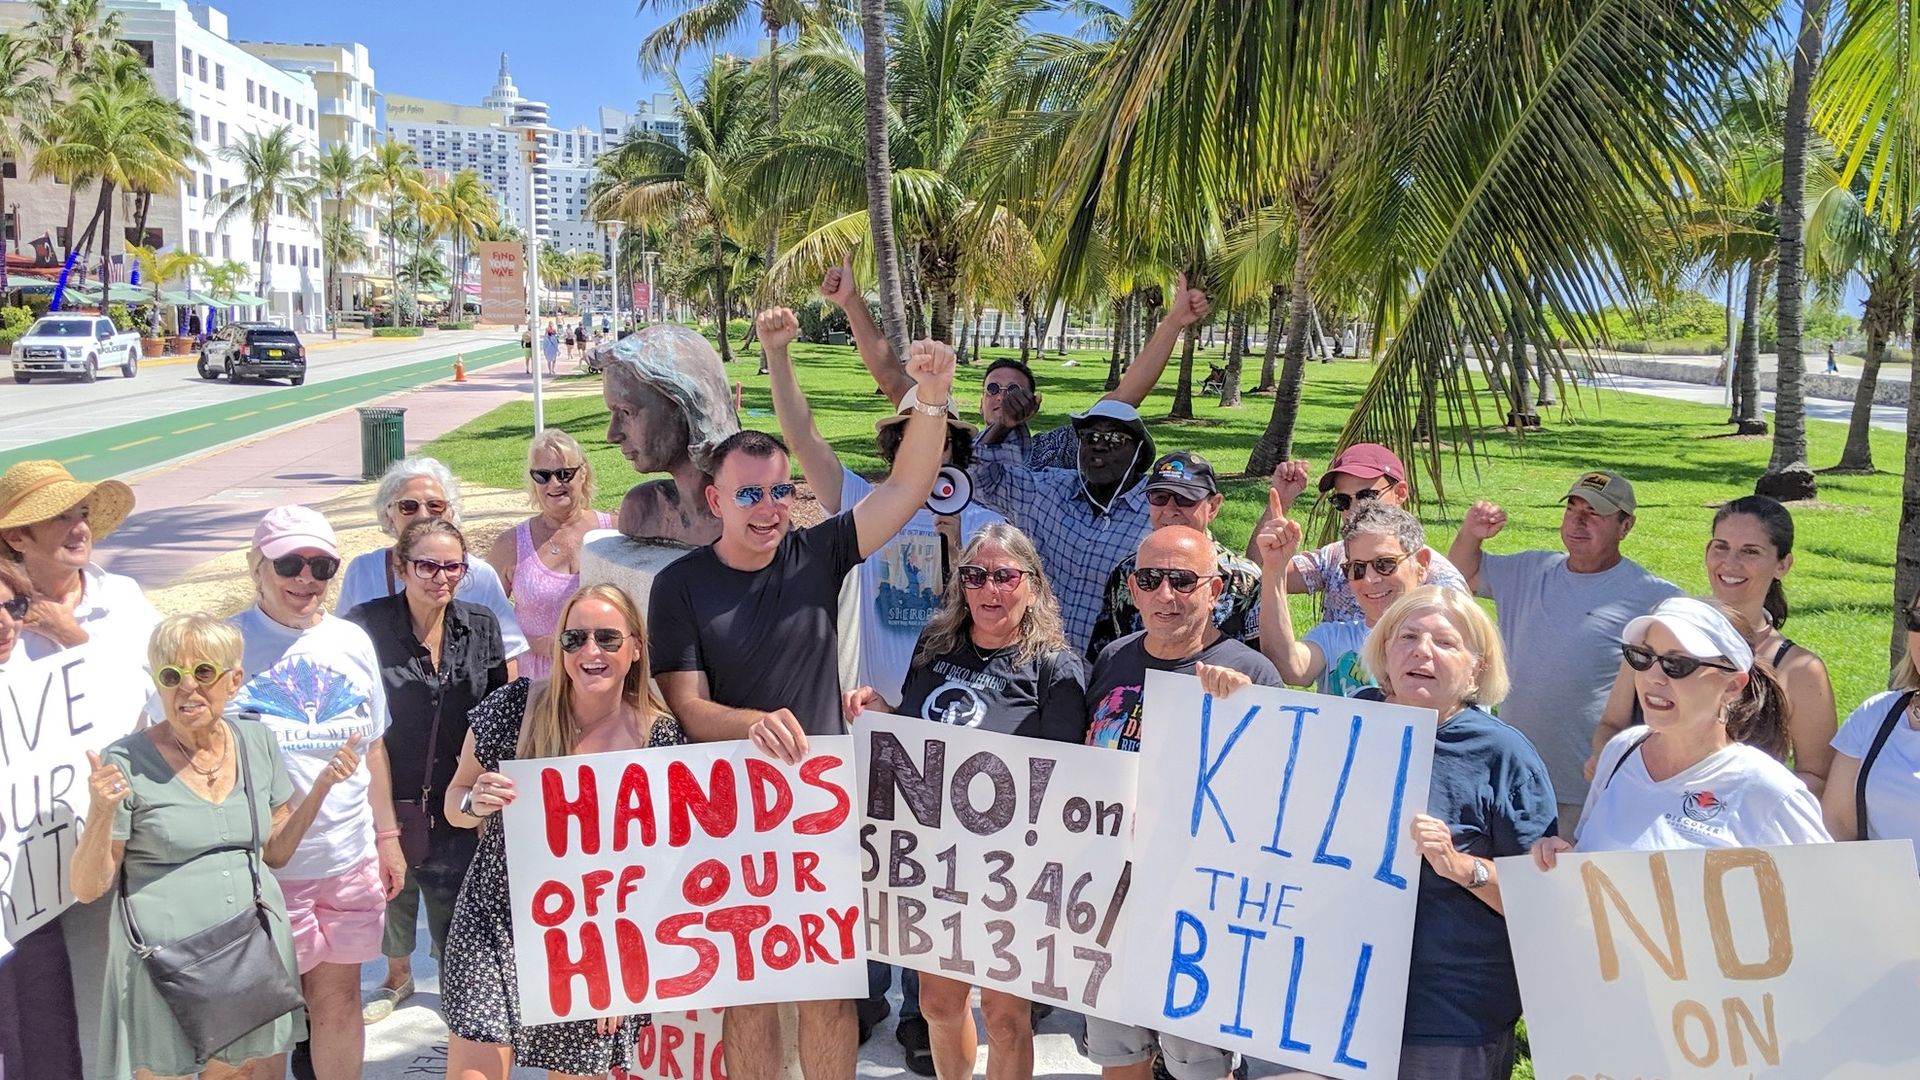 Protesters rally in South Beach against a bill that would make it easier for property owners to demolish historic buildings.